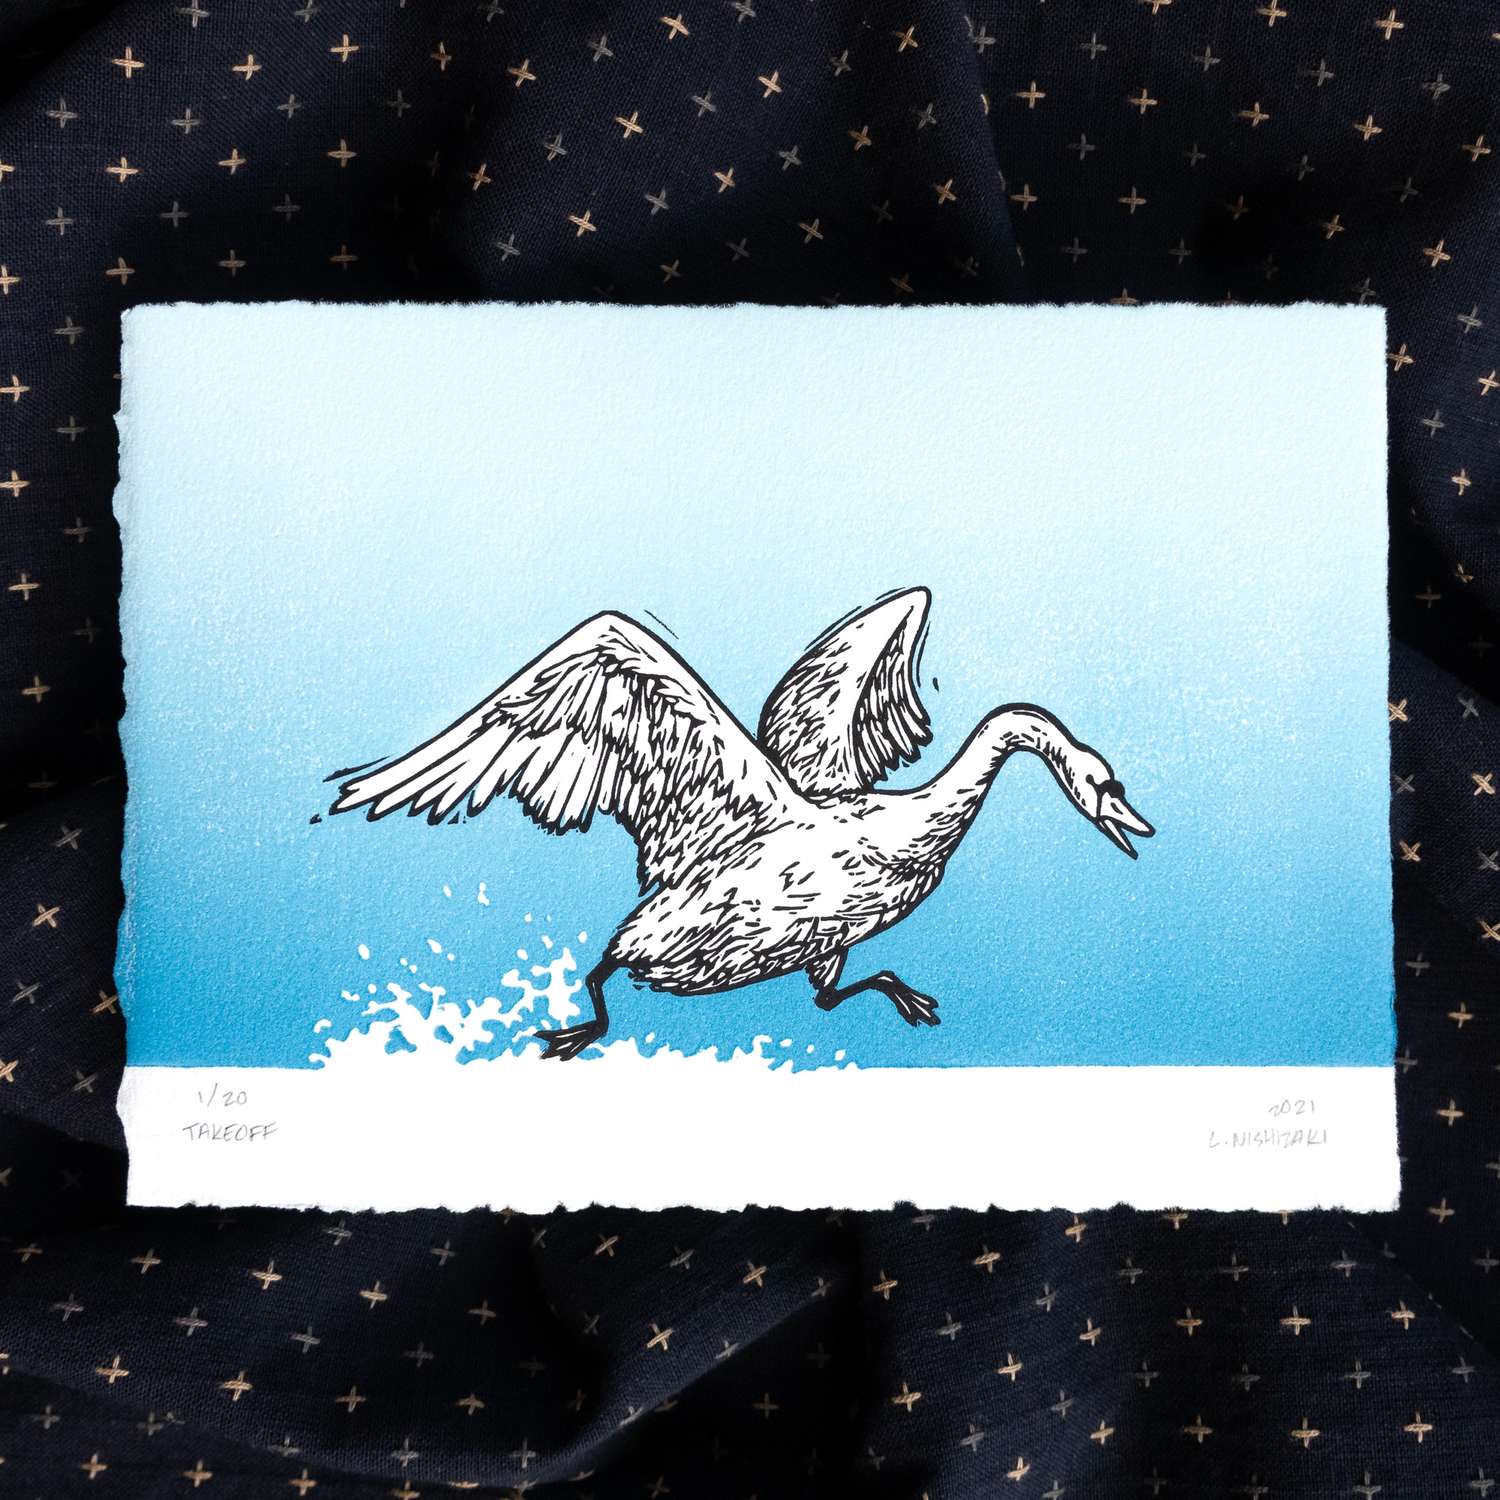 A 2-color print of a swan splashing on the surface of a lake as it takes off. The swan's wings are spread and the water and water spray are depicted using the uninked white paper. The sky is a blue-to-light blue gradient. The edges of the print are fuzzy and the print sits above a dark rumpled piece of fabric.